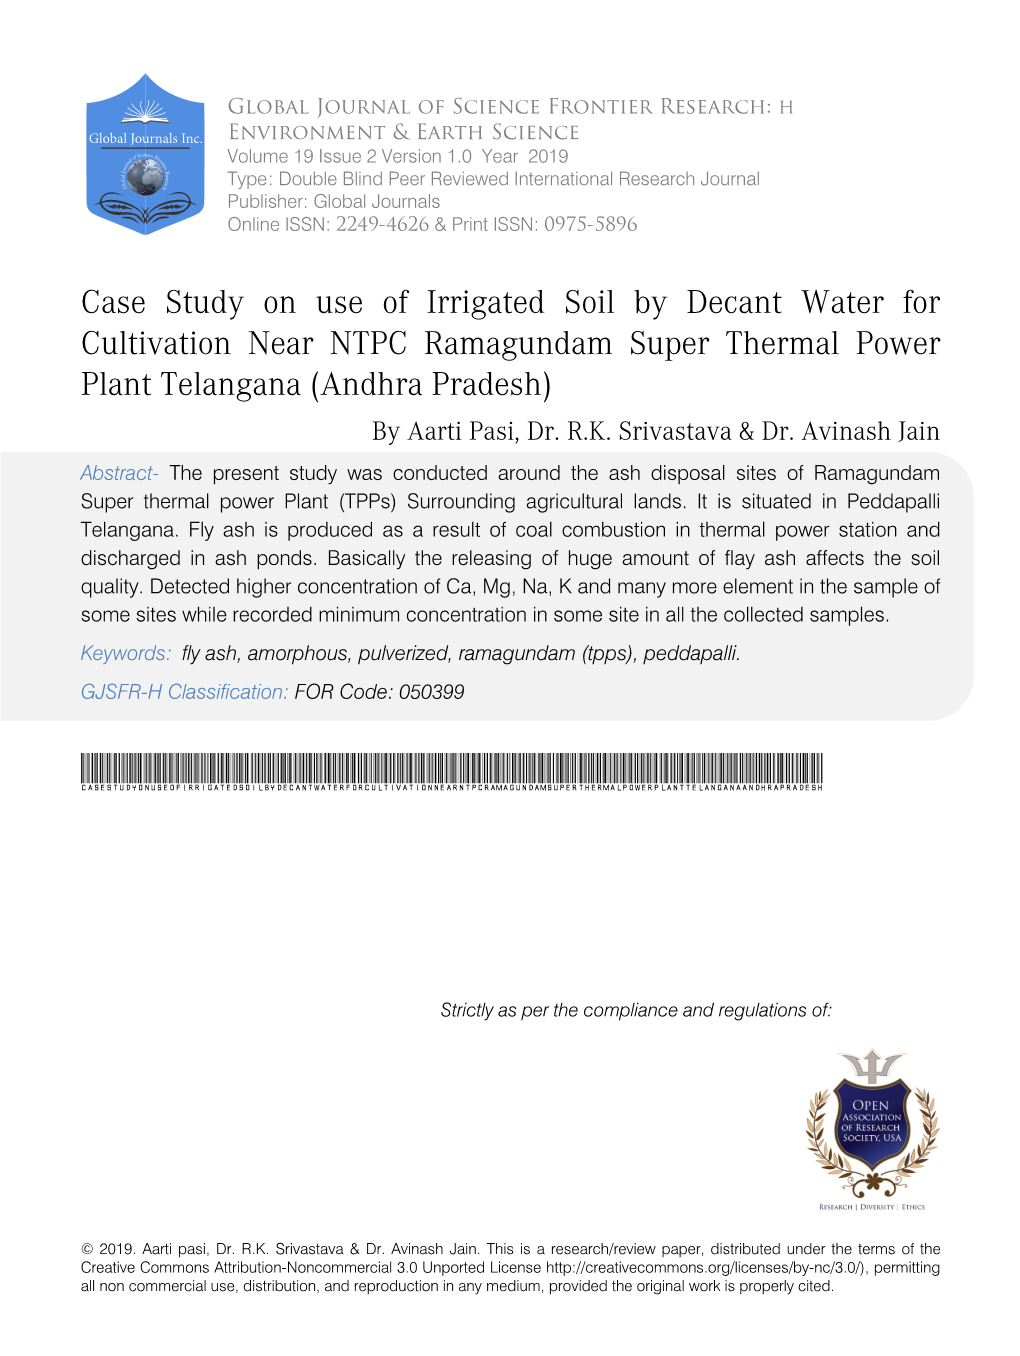 Case Study on Use of Irrigated Soil by Decant Water for Cultivation Near NTPC Ramagundam Super Thermal Power Plant Telangana (Andhra Pradesh)